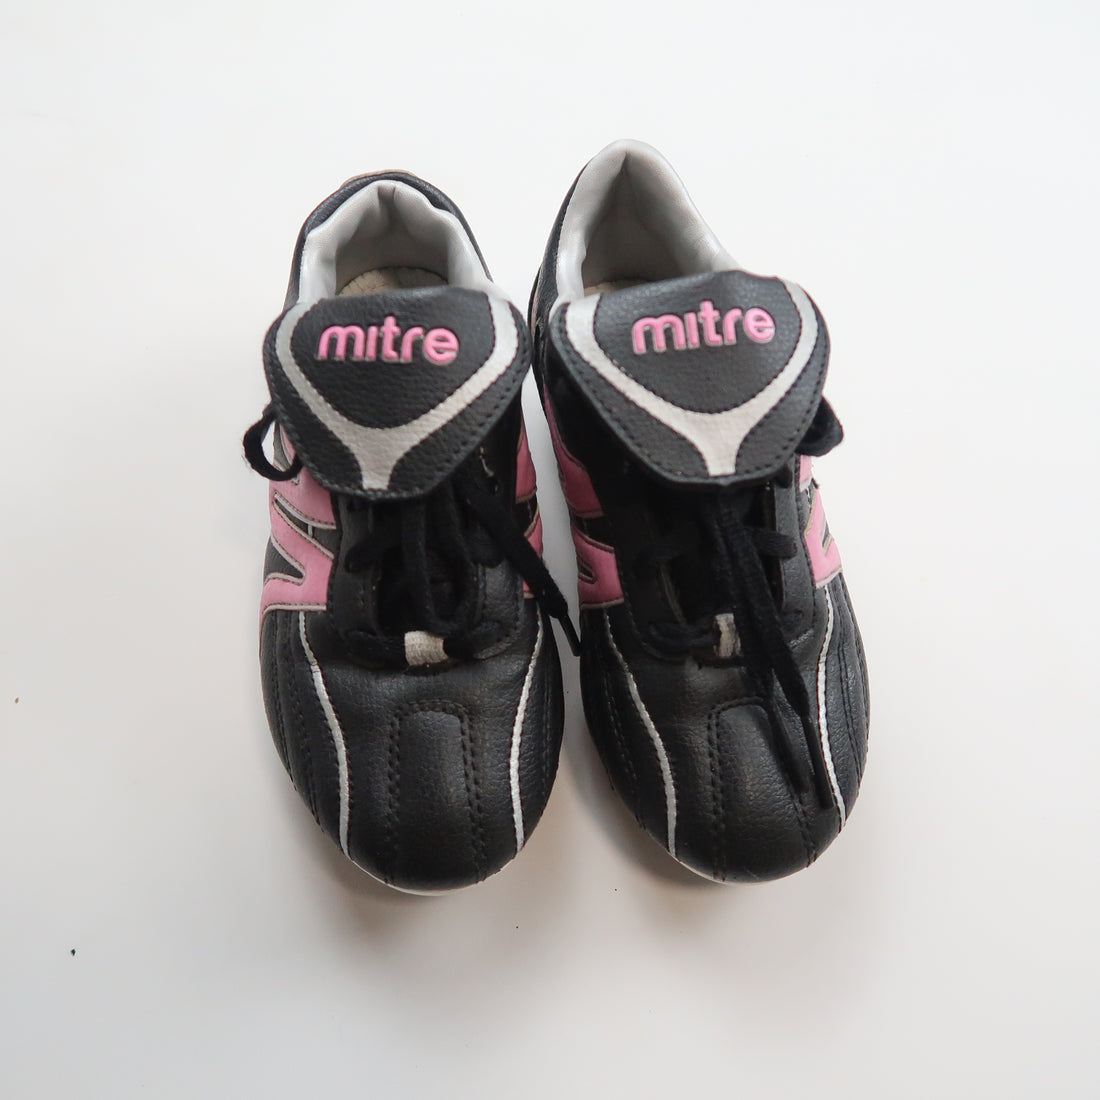 Mitre - Cleats (Shoes - Youth 1)